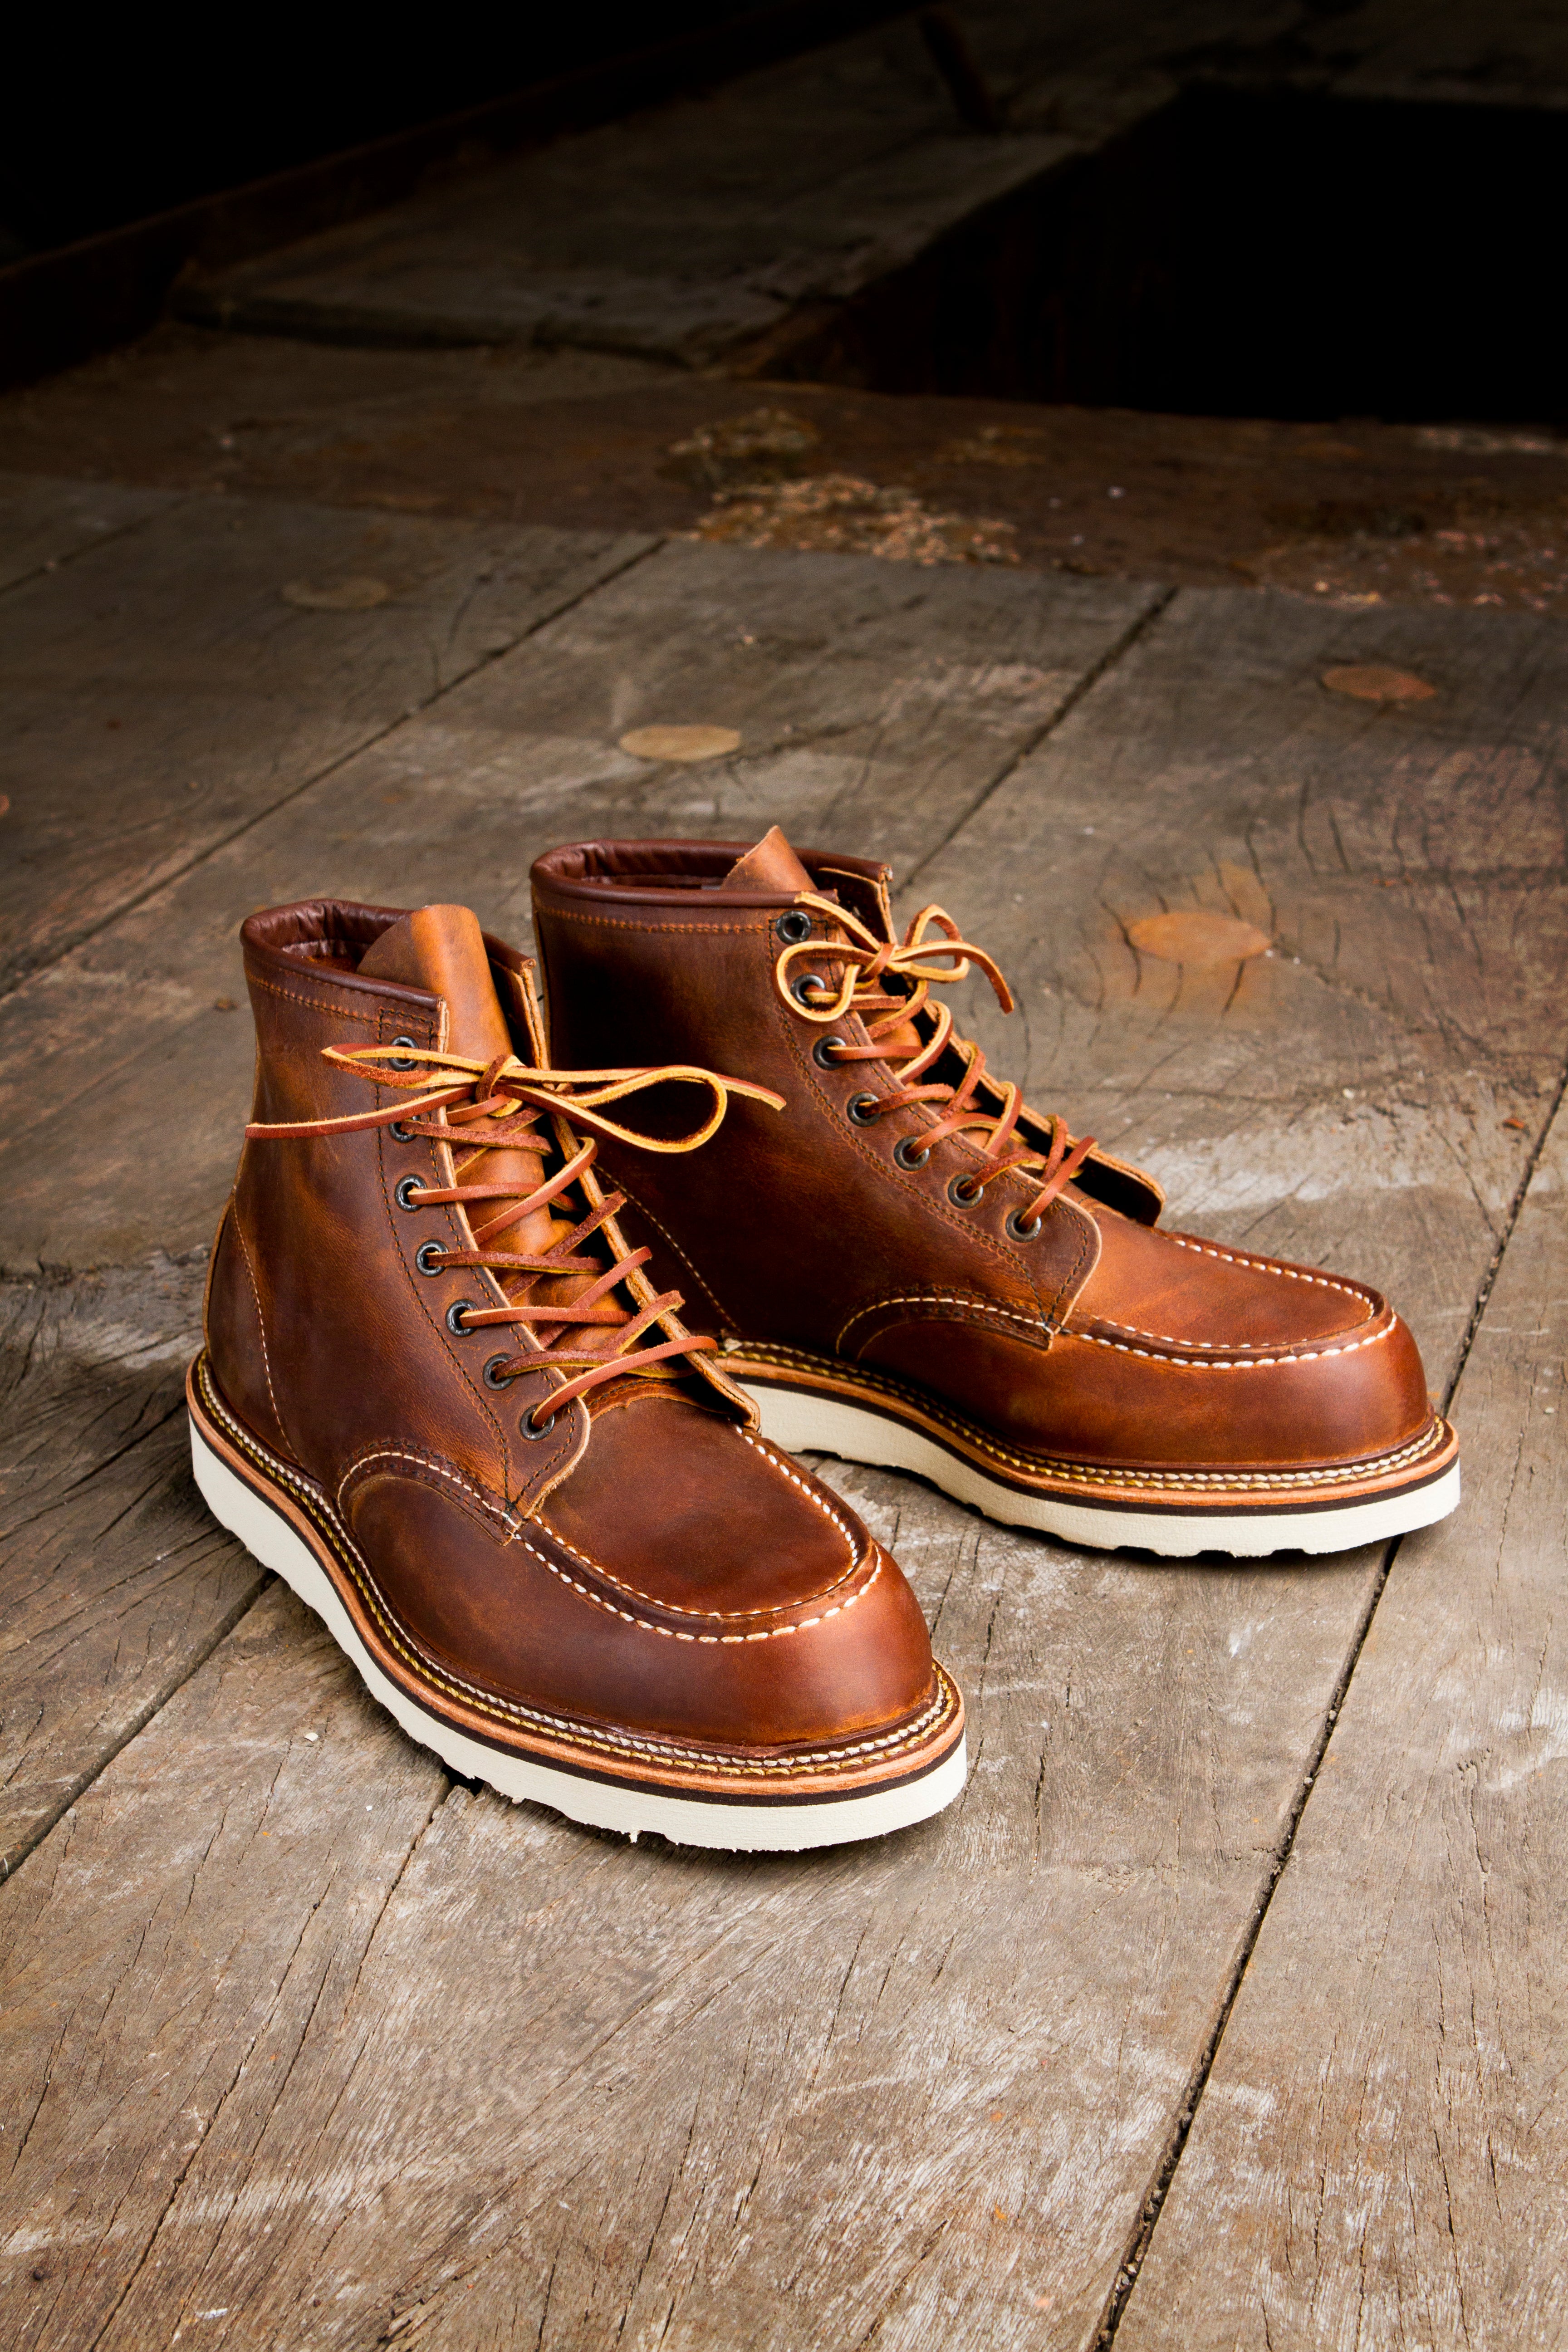 Red Wing 6 inch Classic Moc Toe Boots - Copper